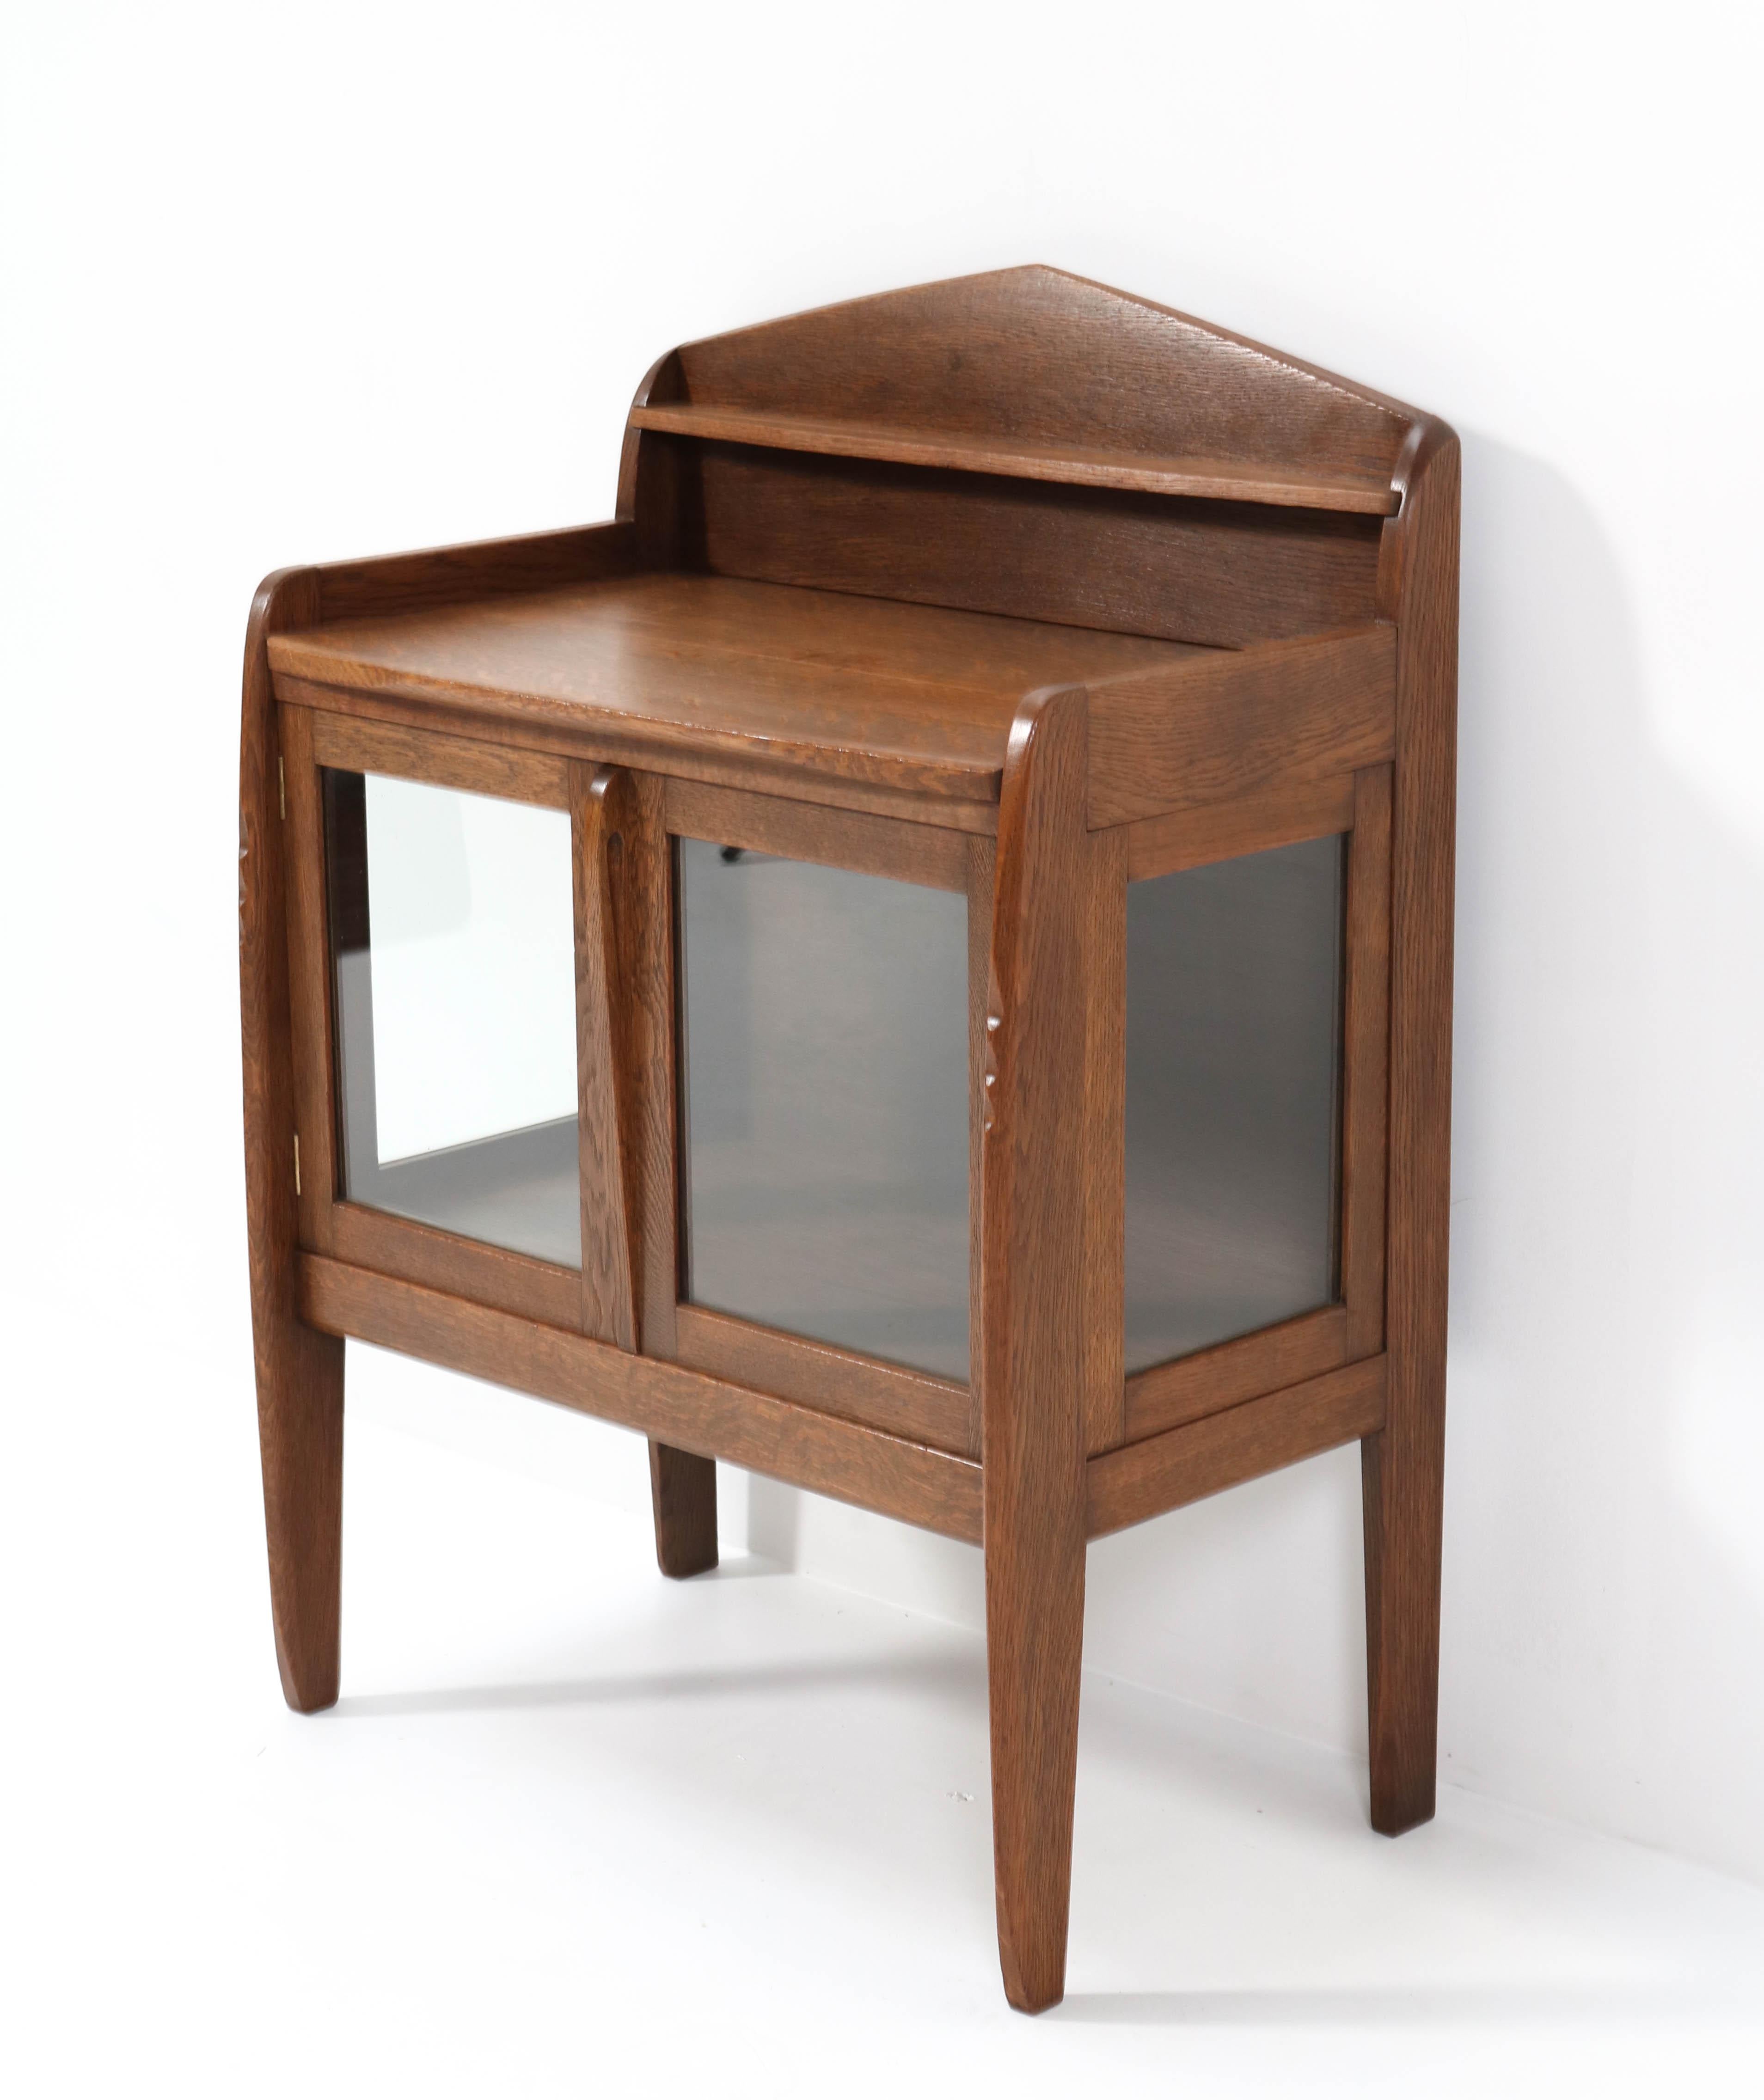 Stunning and rare Art Deco Amsterdamse School tea cabinet.
Design attributed to A.F. van der Wey.
Striking Dutch design from the 1920s.
Solid oak with hand-carved details.
In very good condition with a beautiful patina.